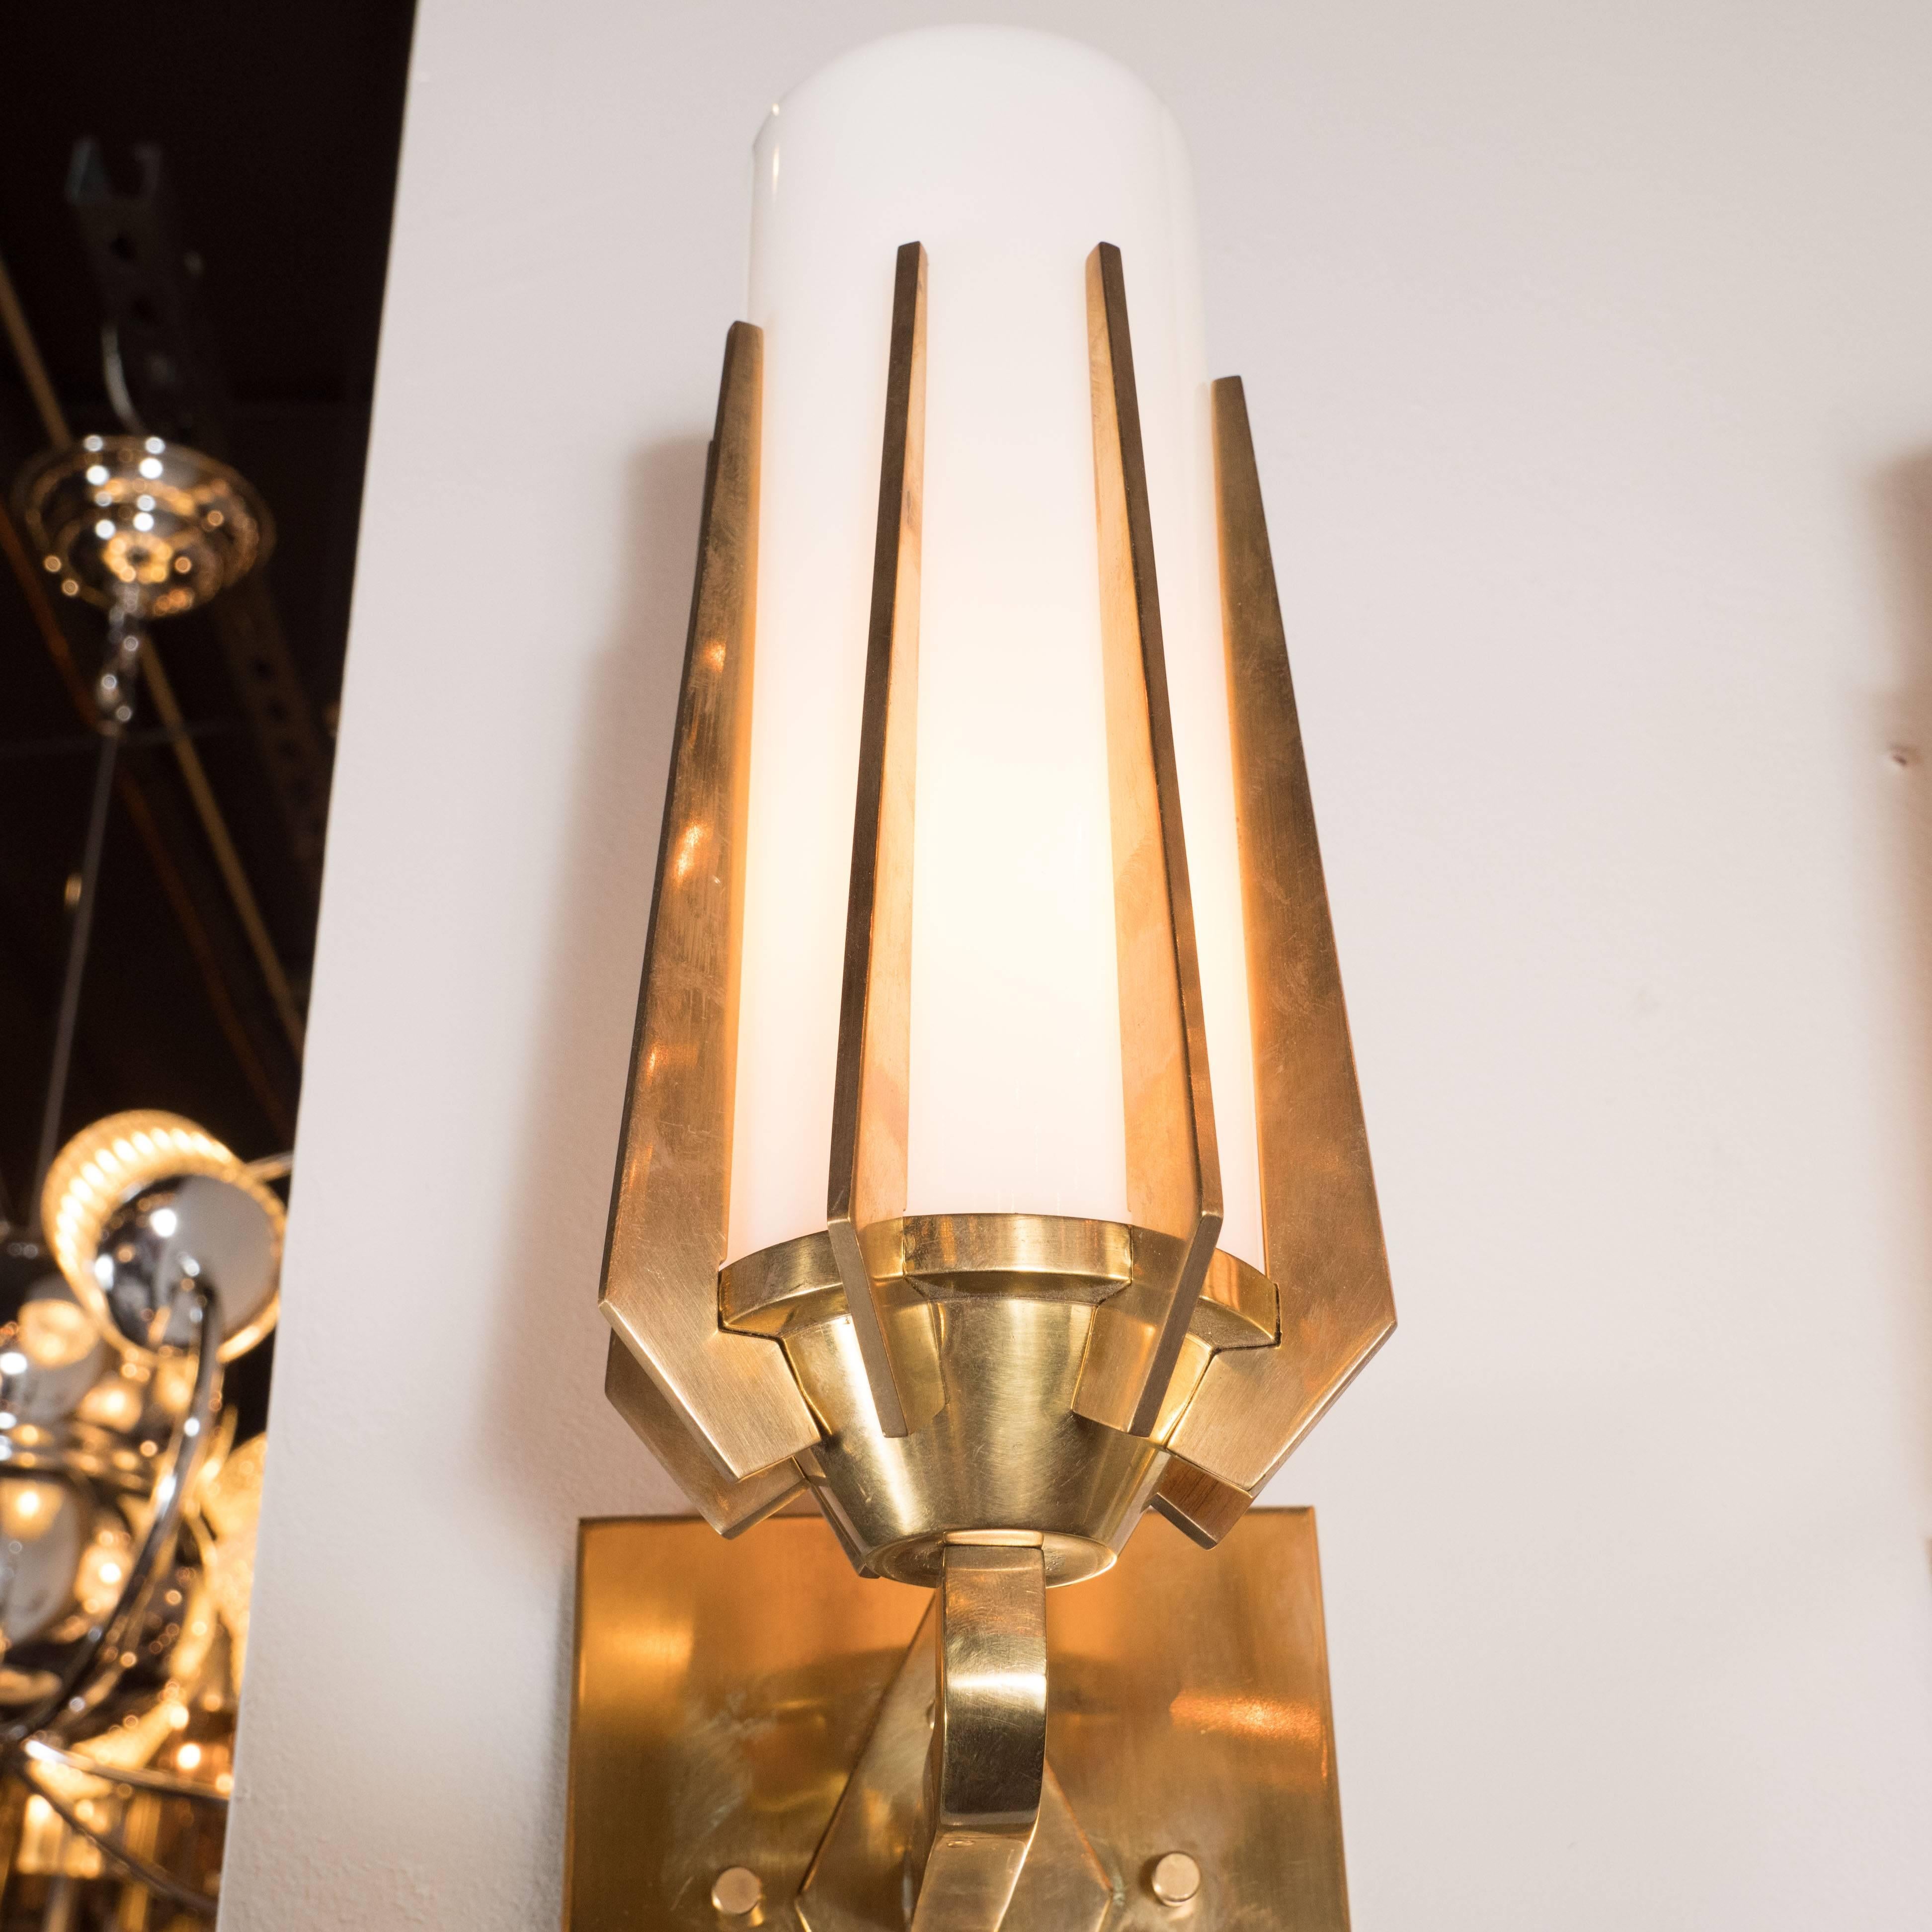 Mid-Century Modern Pair of Midcentury Sconces in Brass and White Glass in the Manner of Gio Ponti